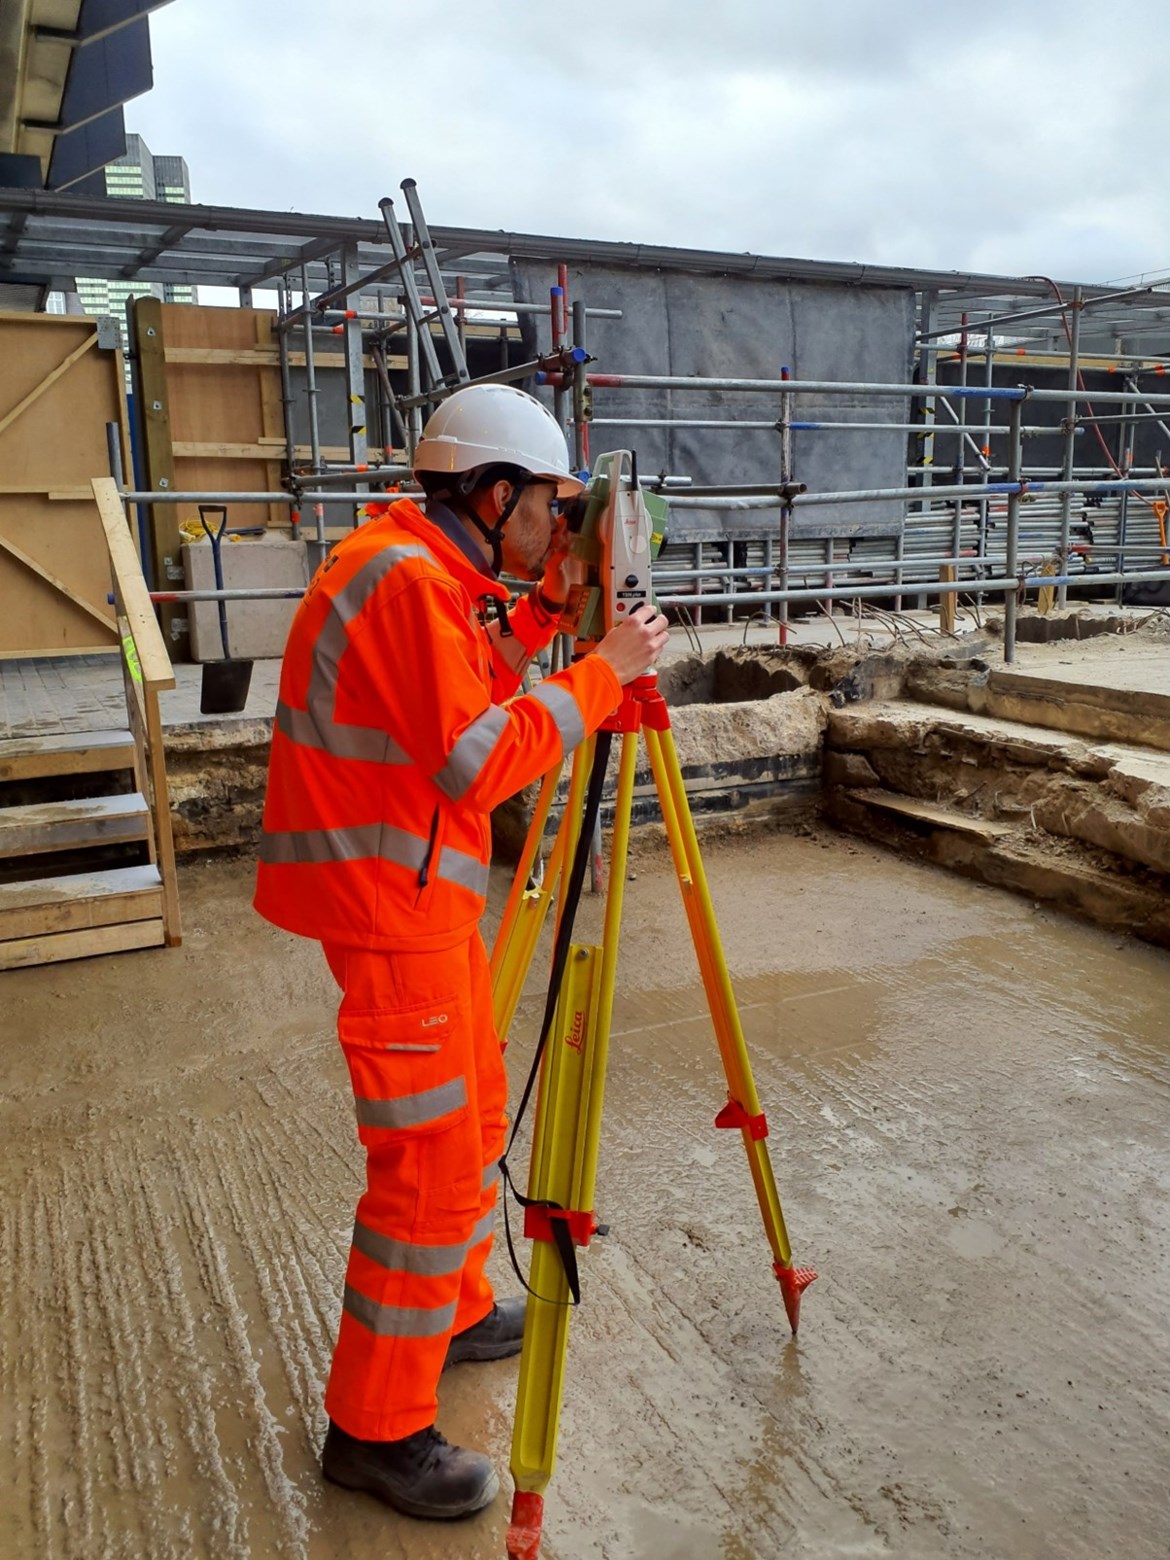 HS2 welcomes its 900th apprentice: Leon is HS2's 900th apprentice and is studying for a Civil Engineering degree